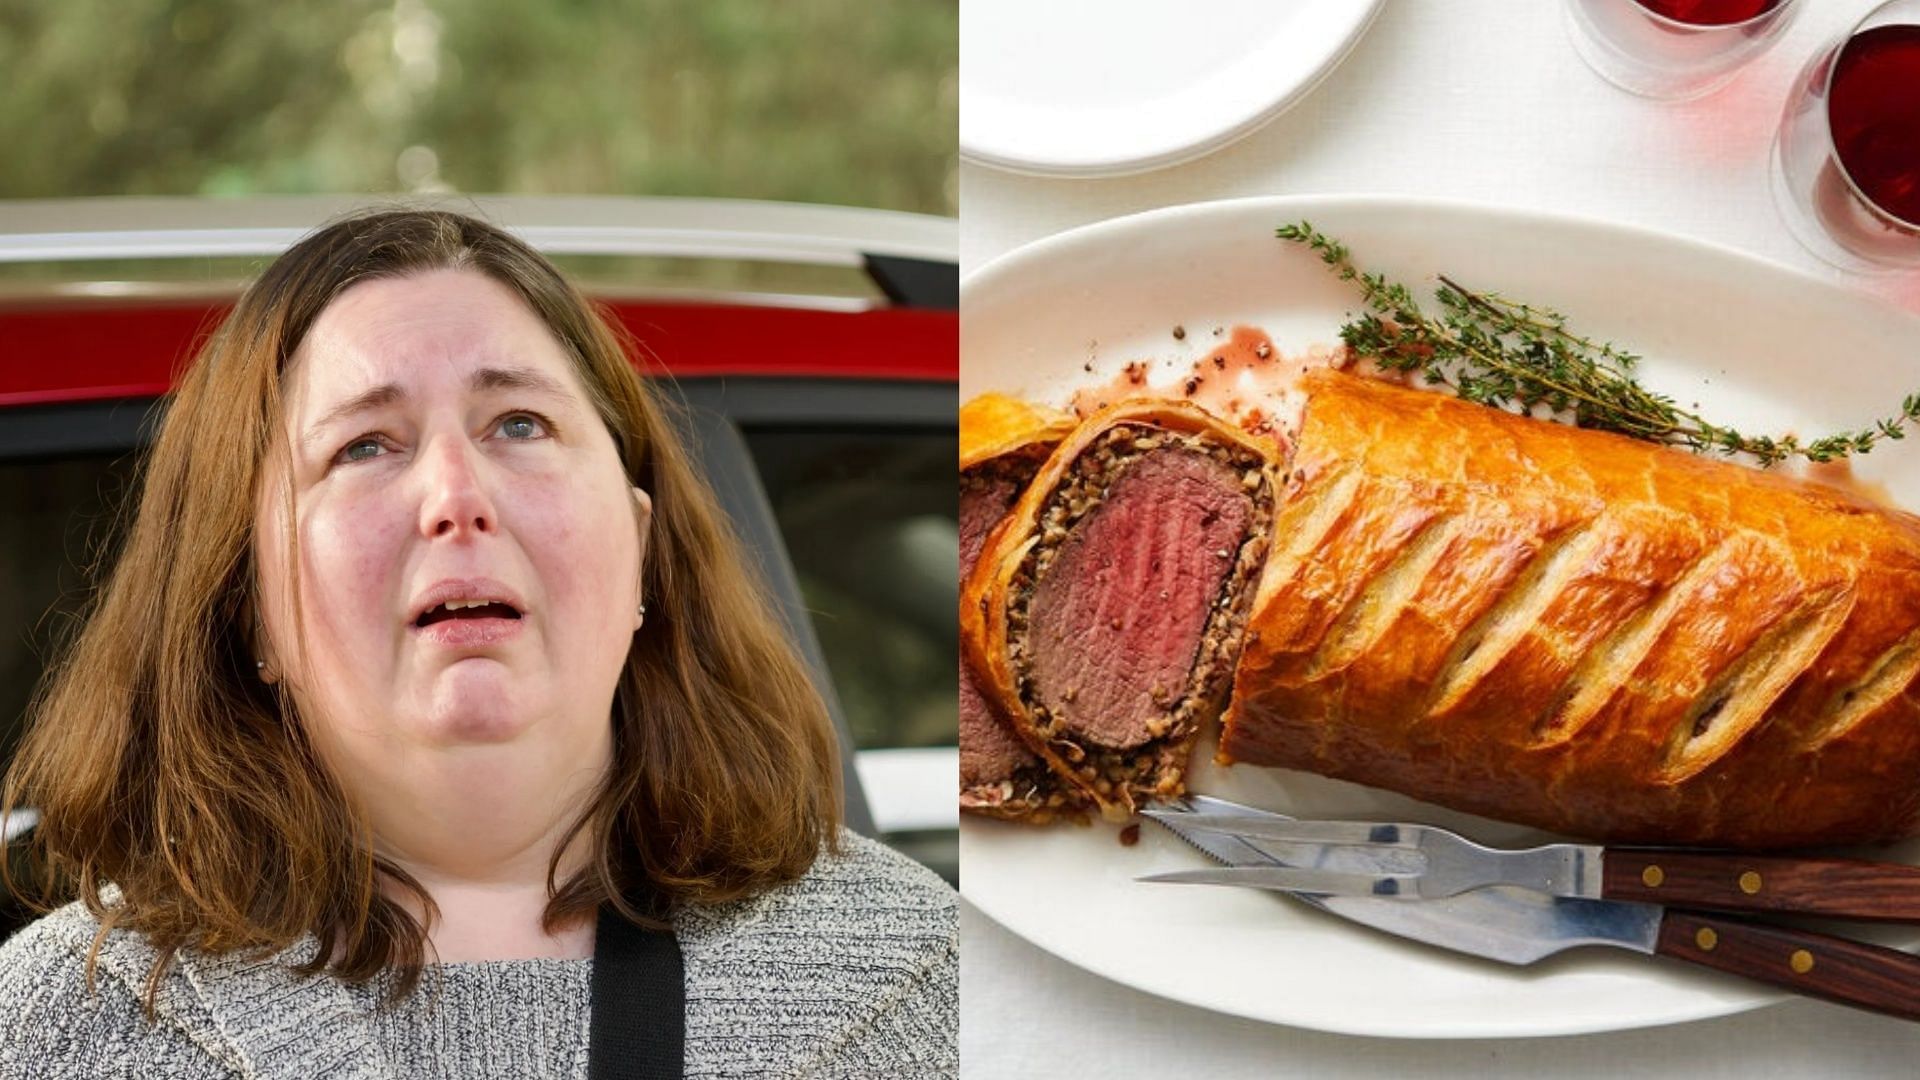 Erin Patterson gives police statement about three deaths caused by the Beef Wellington she prepared. (Image via Marta Pascual Juanola, Ryan Liebe), 